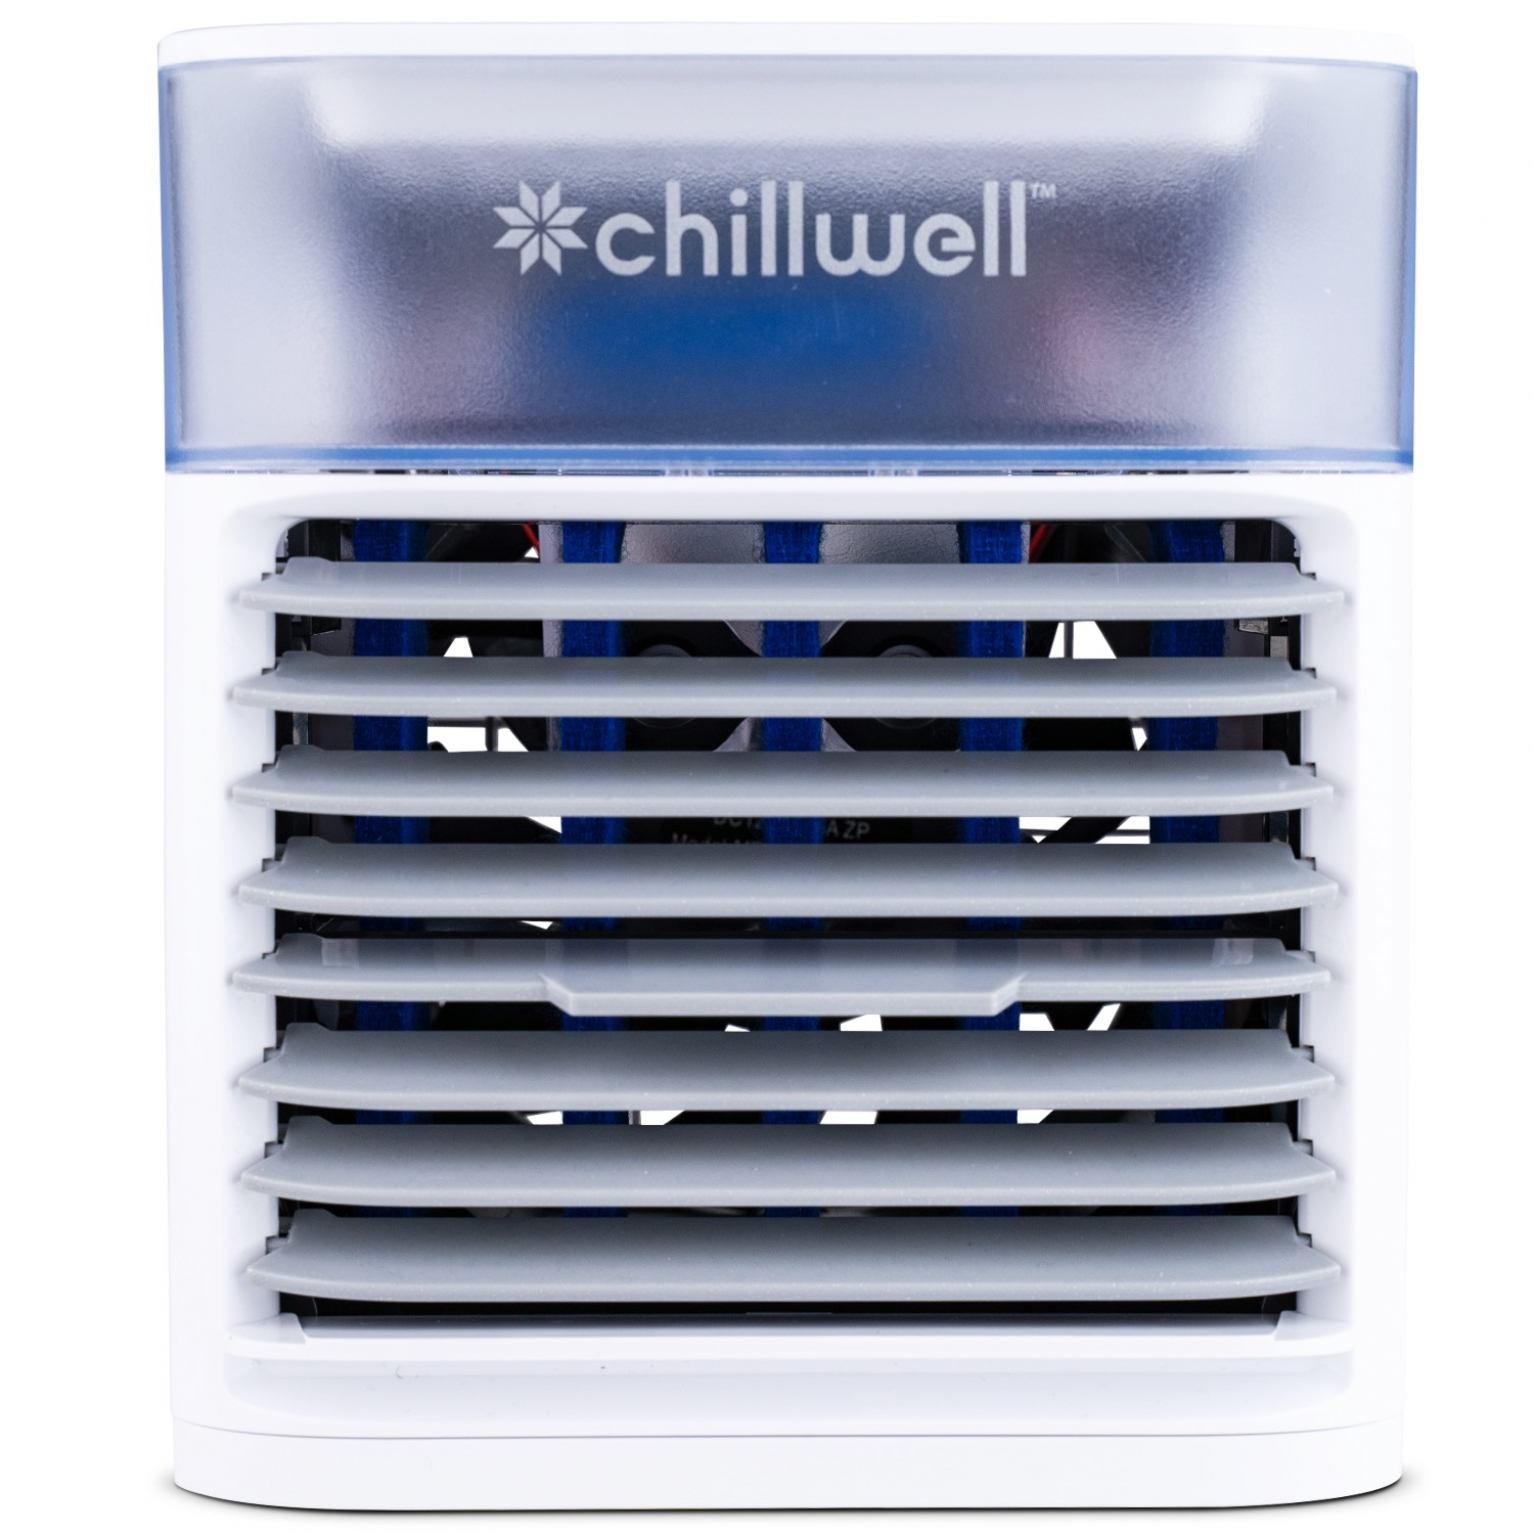 Chillwell AC Personal Air Cooler Reviews